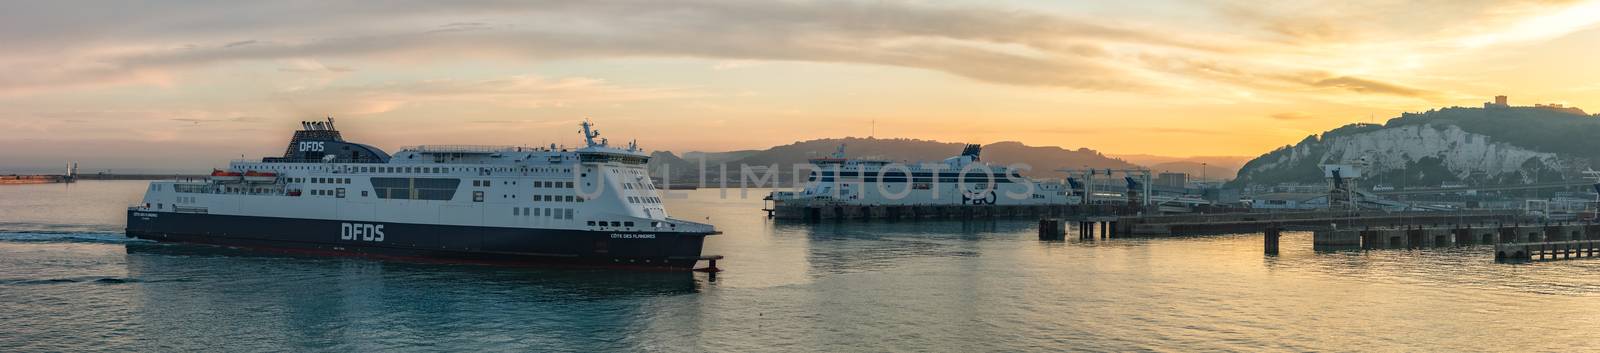 Port of Dover, England - June 24, 2020: Panoramic landscape shot of Dover Port with a P&O ferry boat docked and DFDS ferry boat docking at sunset. Beautiful warm orange sky and hills in the background